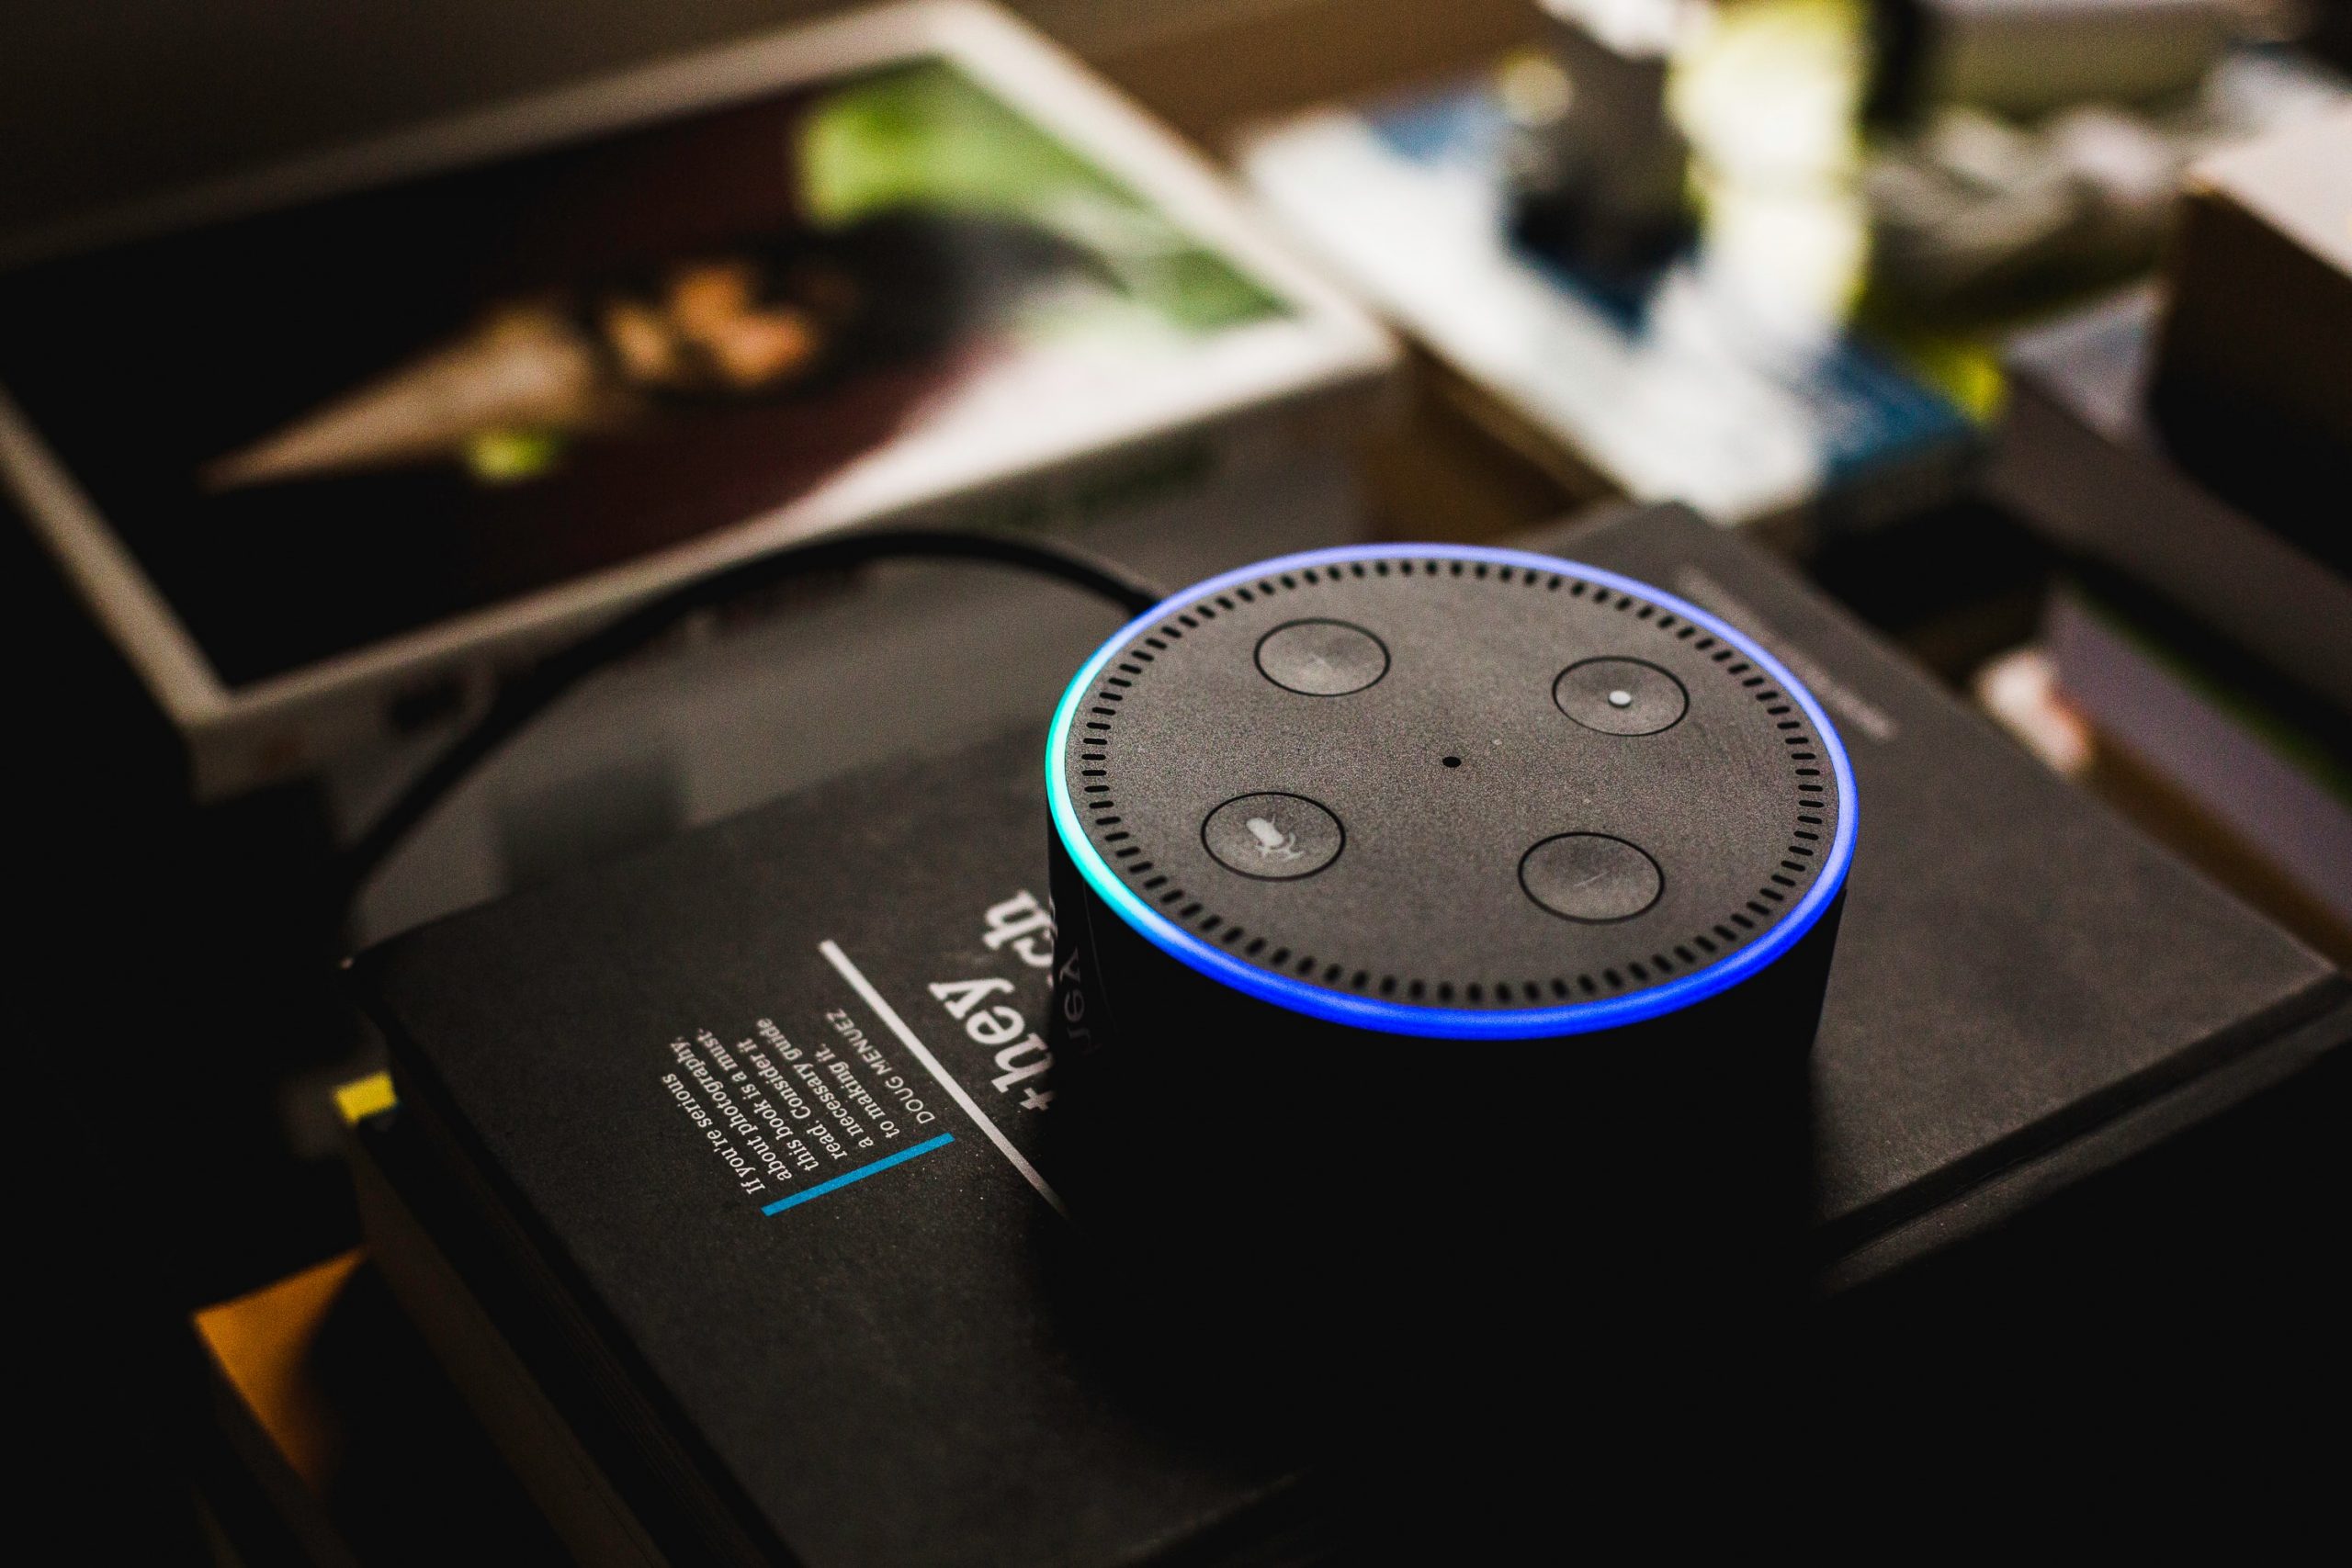 HOW WILL ALEXA CHANGE OUR FUTURE?